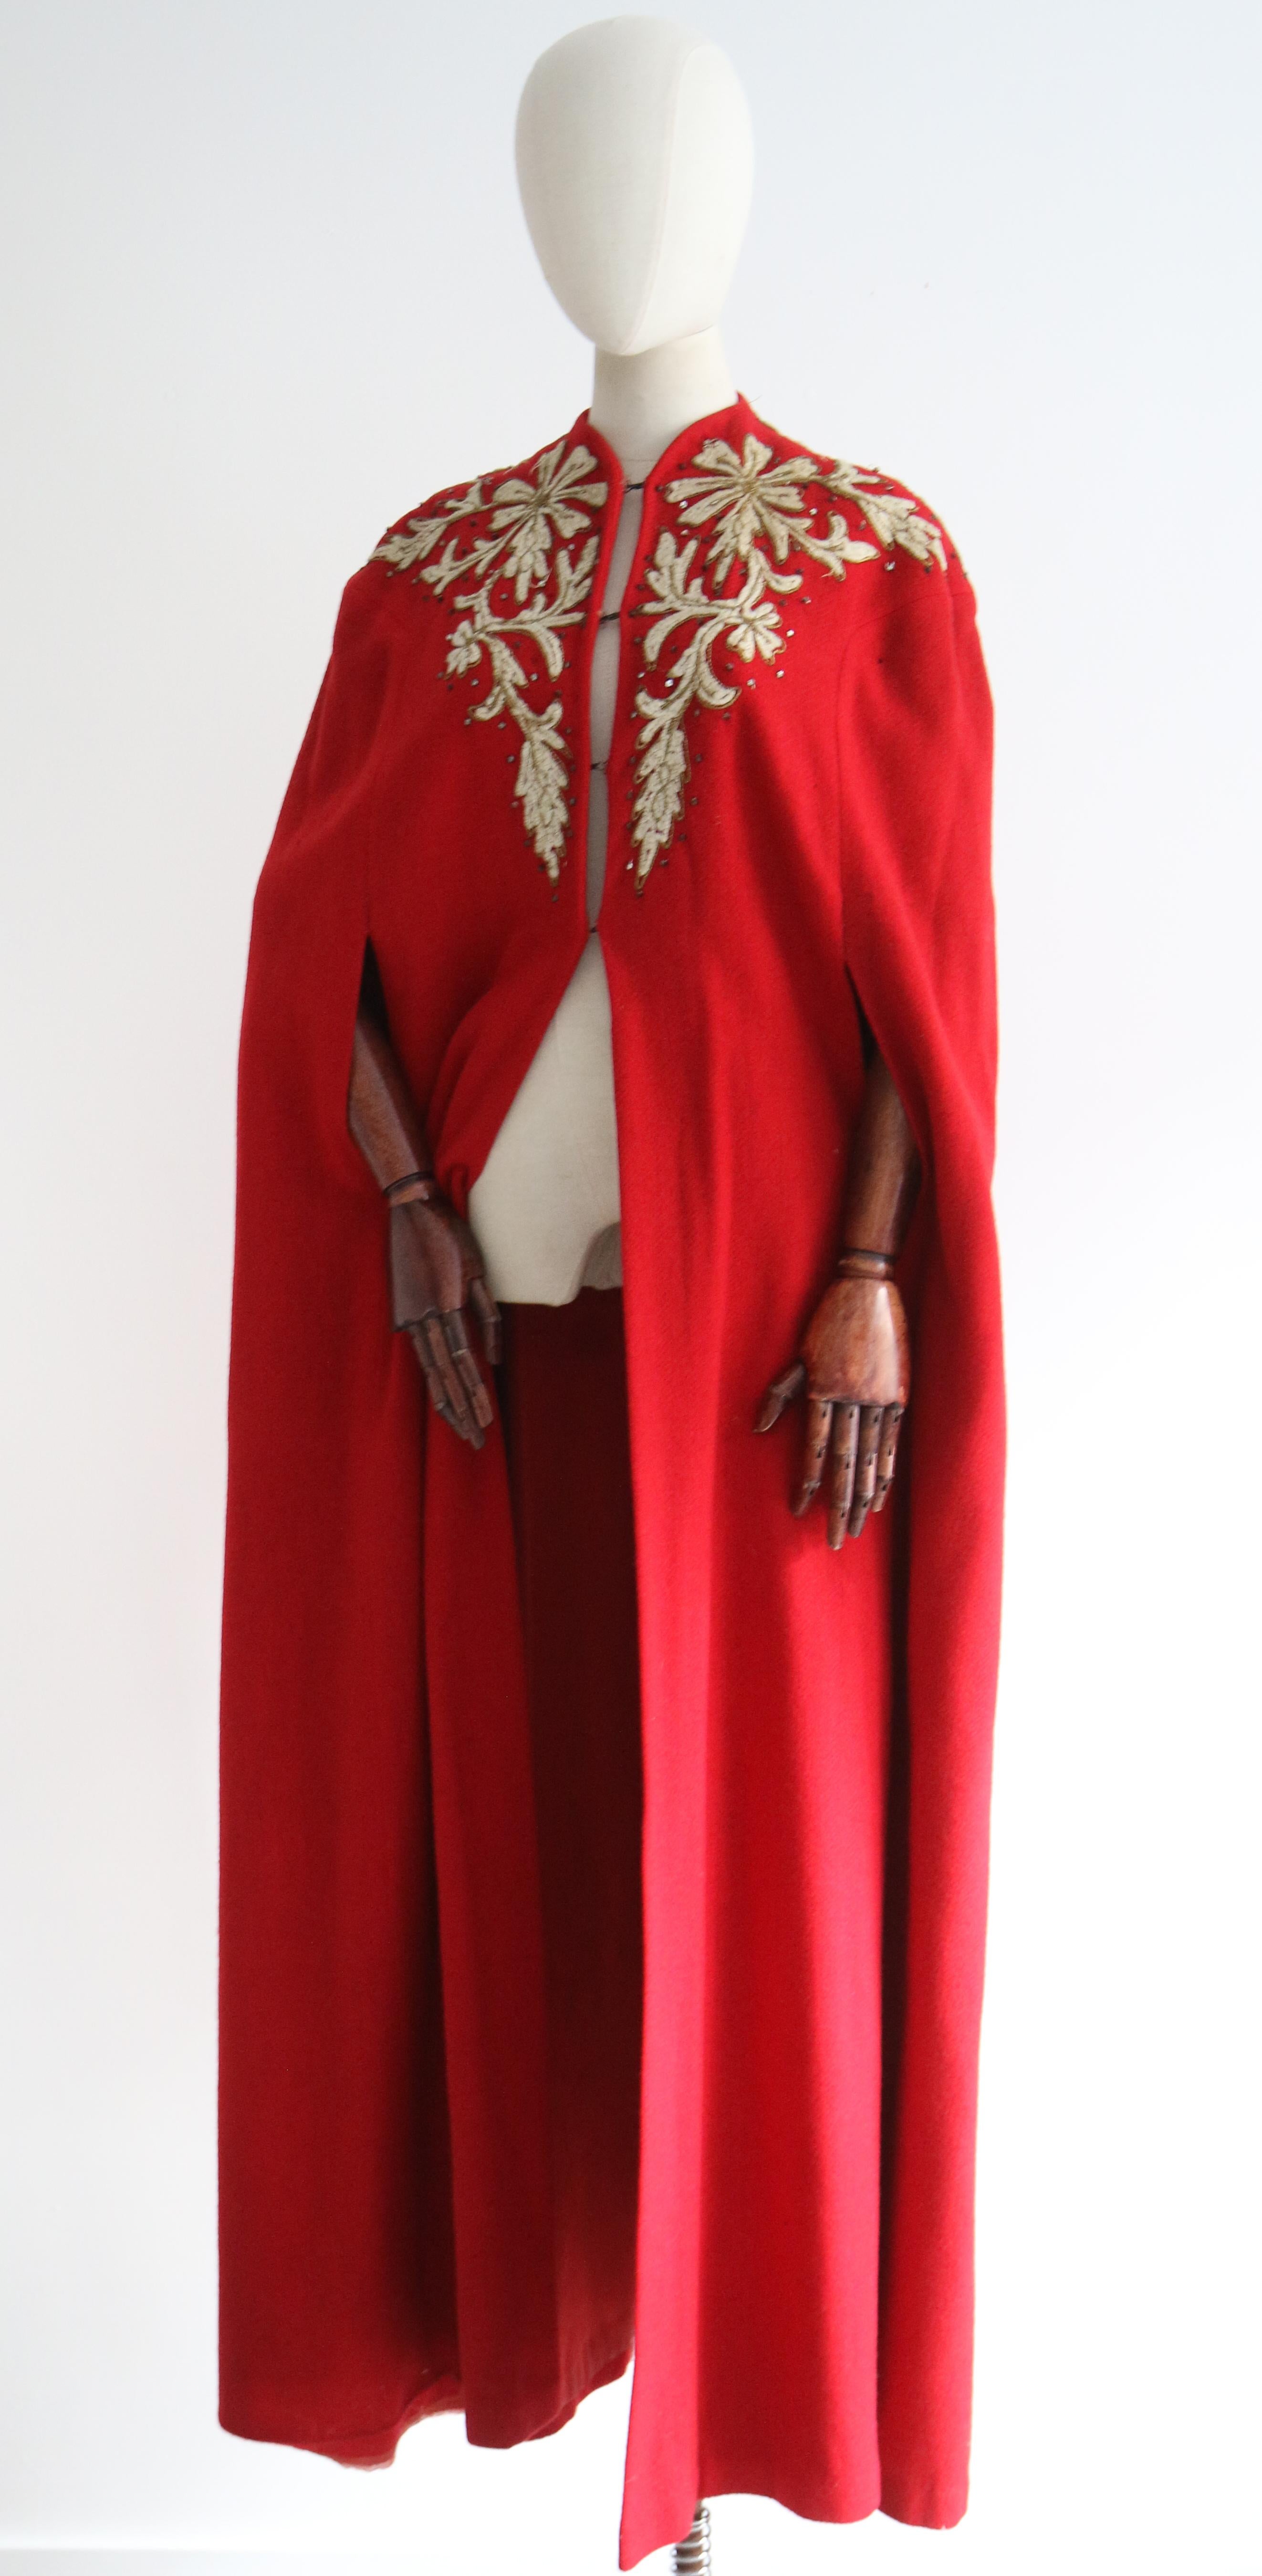 Vintage Early 1940's Red Wool Embroidered Cape UK 10-16 US 6-12 For Sale 4